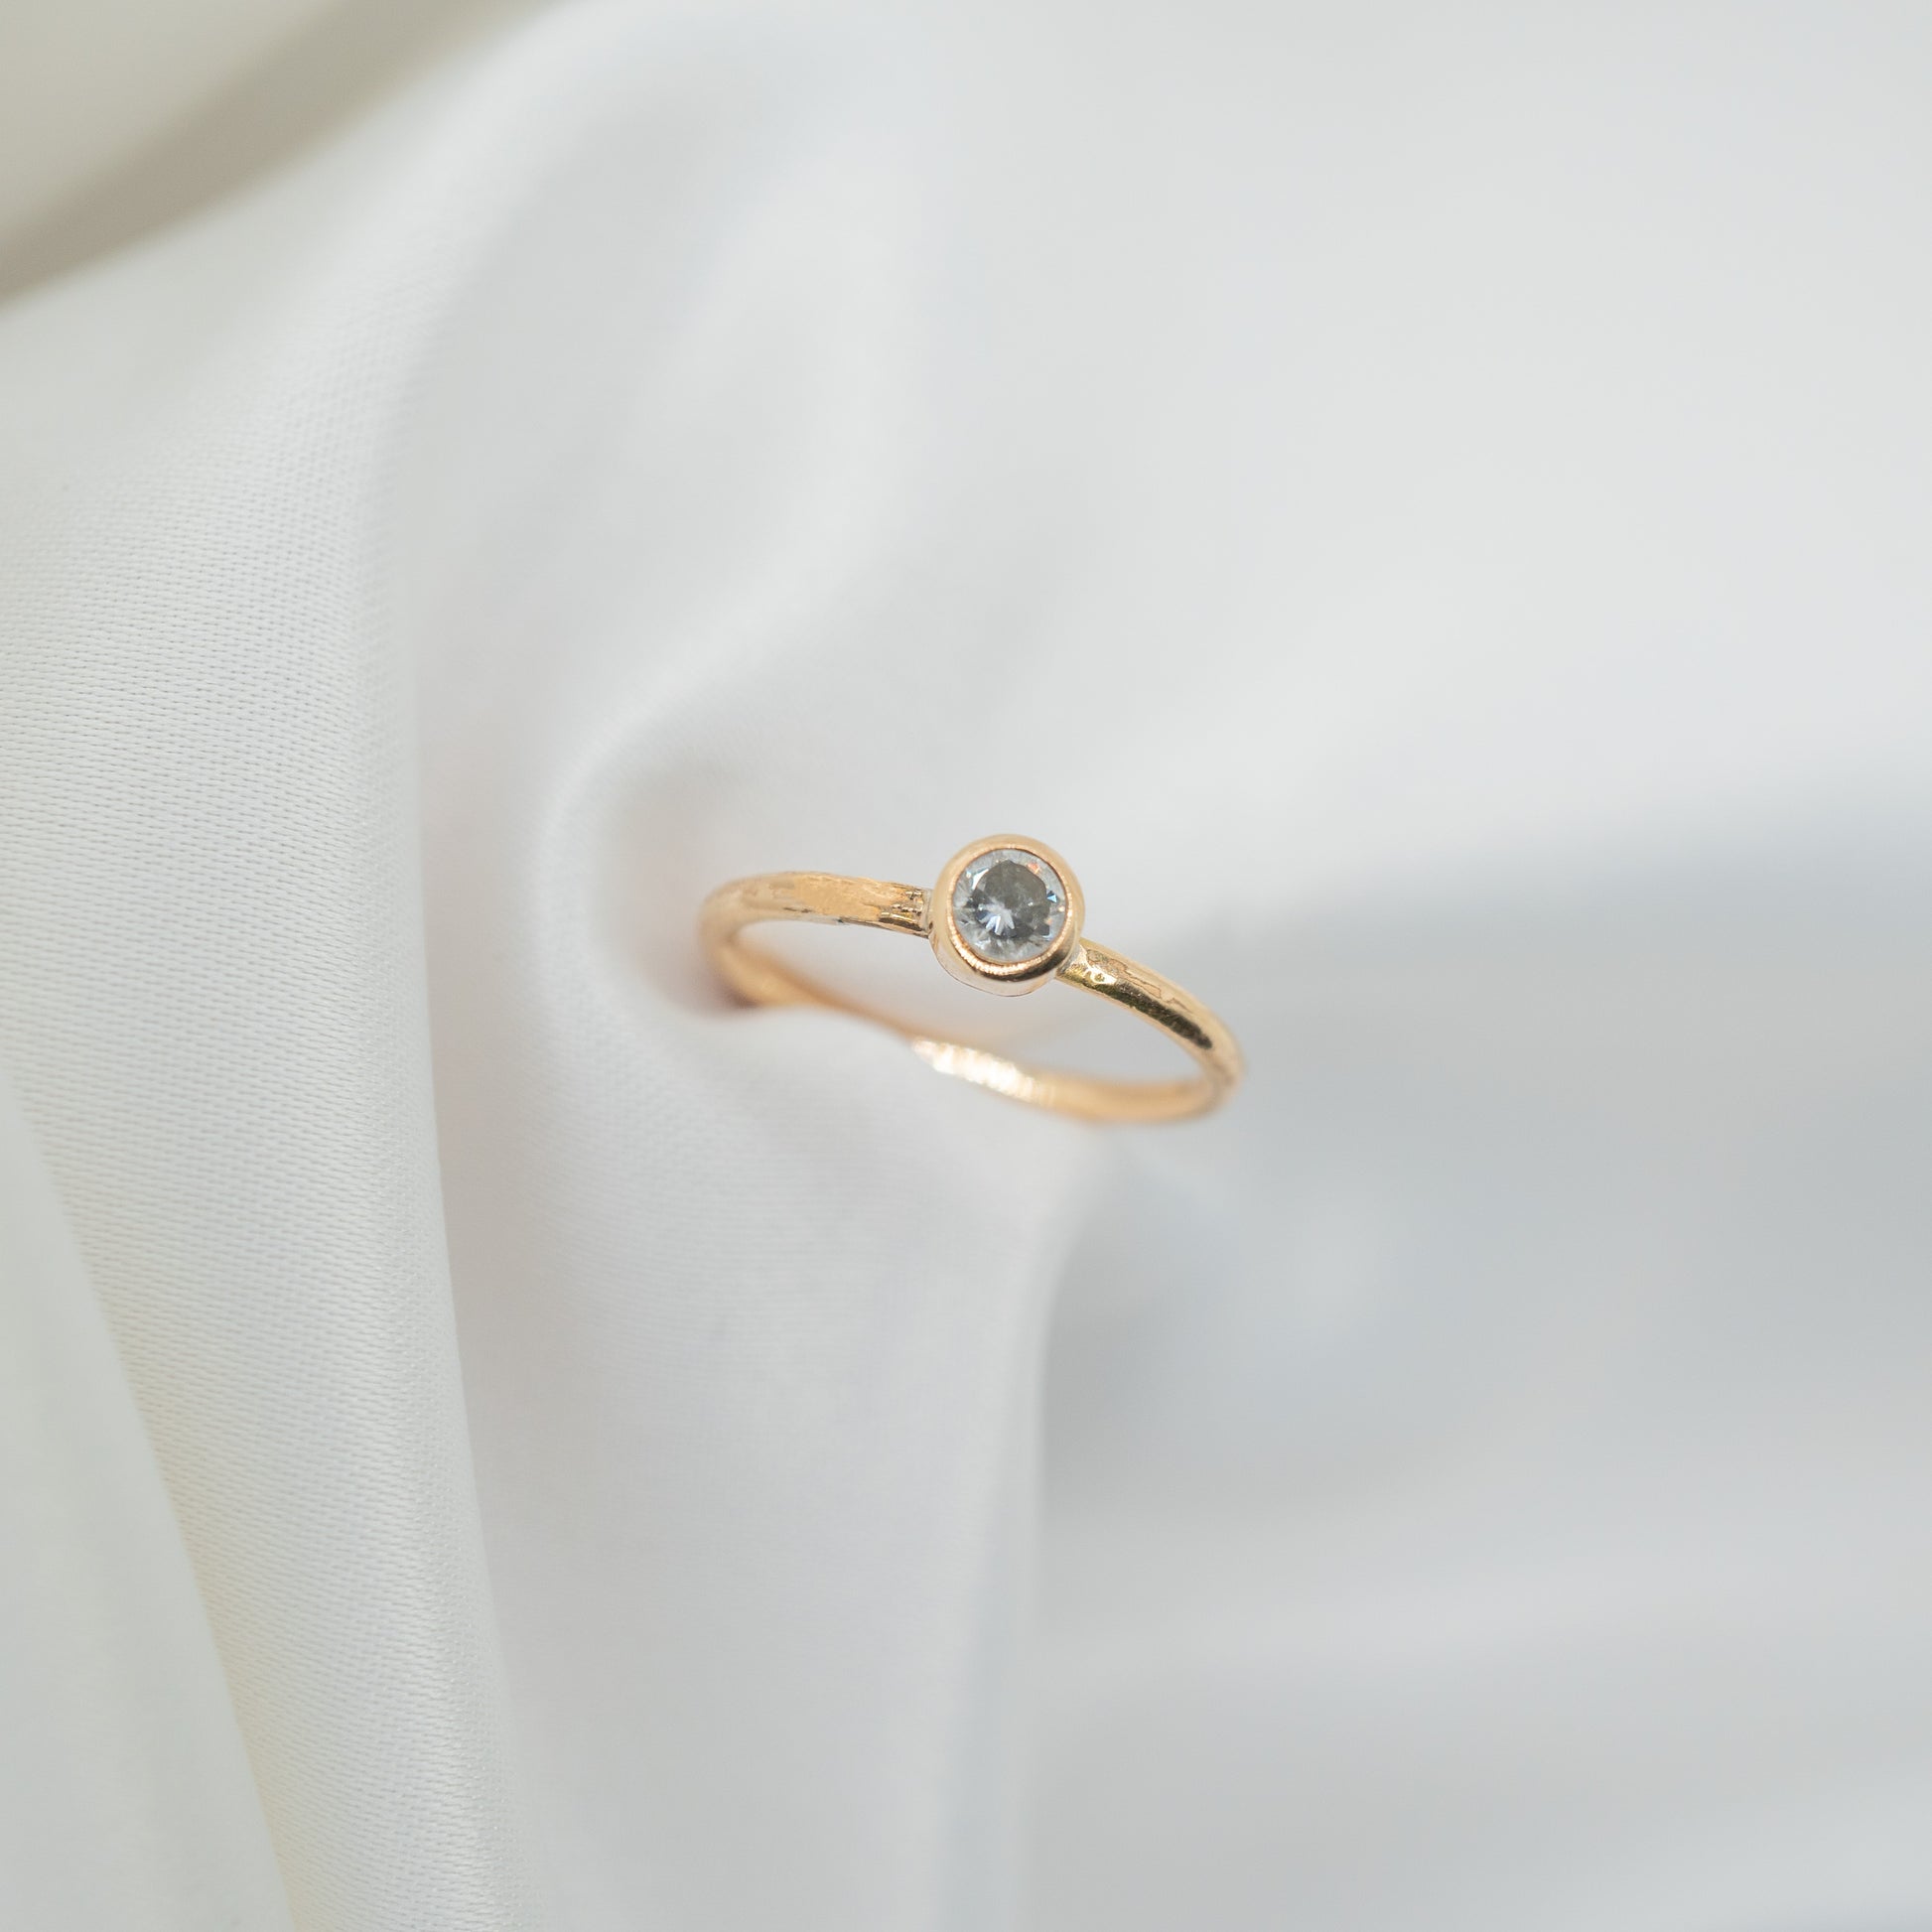 Gold Filled Cubic Zirconia Tube Ring - shot on white - aerial view